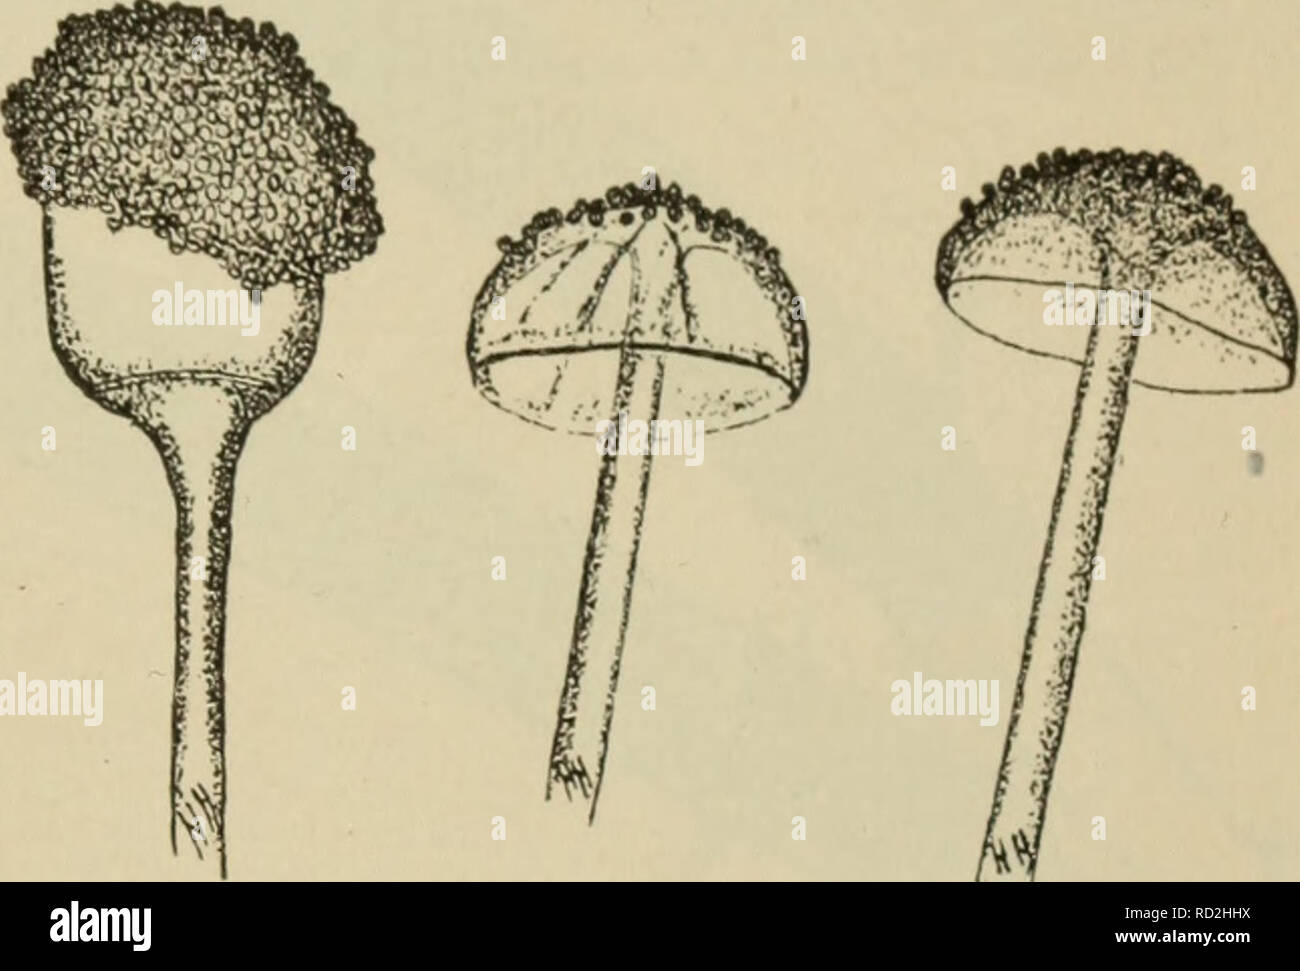 . Elementary botany. Botany. Fig. 133- A mucor (Rhizopns nigricans); at left nearly mature sporangium with columella showing within; m the middle is ruptured sporangium with some of the gonidia clinging to the colu- mella ; at right two ruptured sporangia with everted columella. capable of growing and forming called chlamy do spores. the mycelium again. They are sometimes Water Moulds (Saprolegnia). 279. The water moulds are very interesting plants to study because they are so easy to obtain, and it is so easy to observe a type of gonidium here to which we have referred in our studies ofthealg Stock Photo